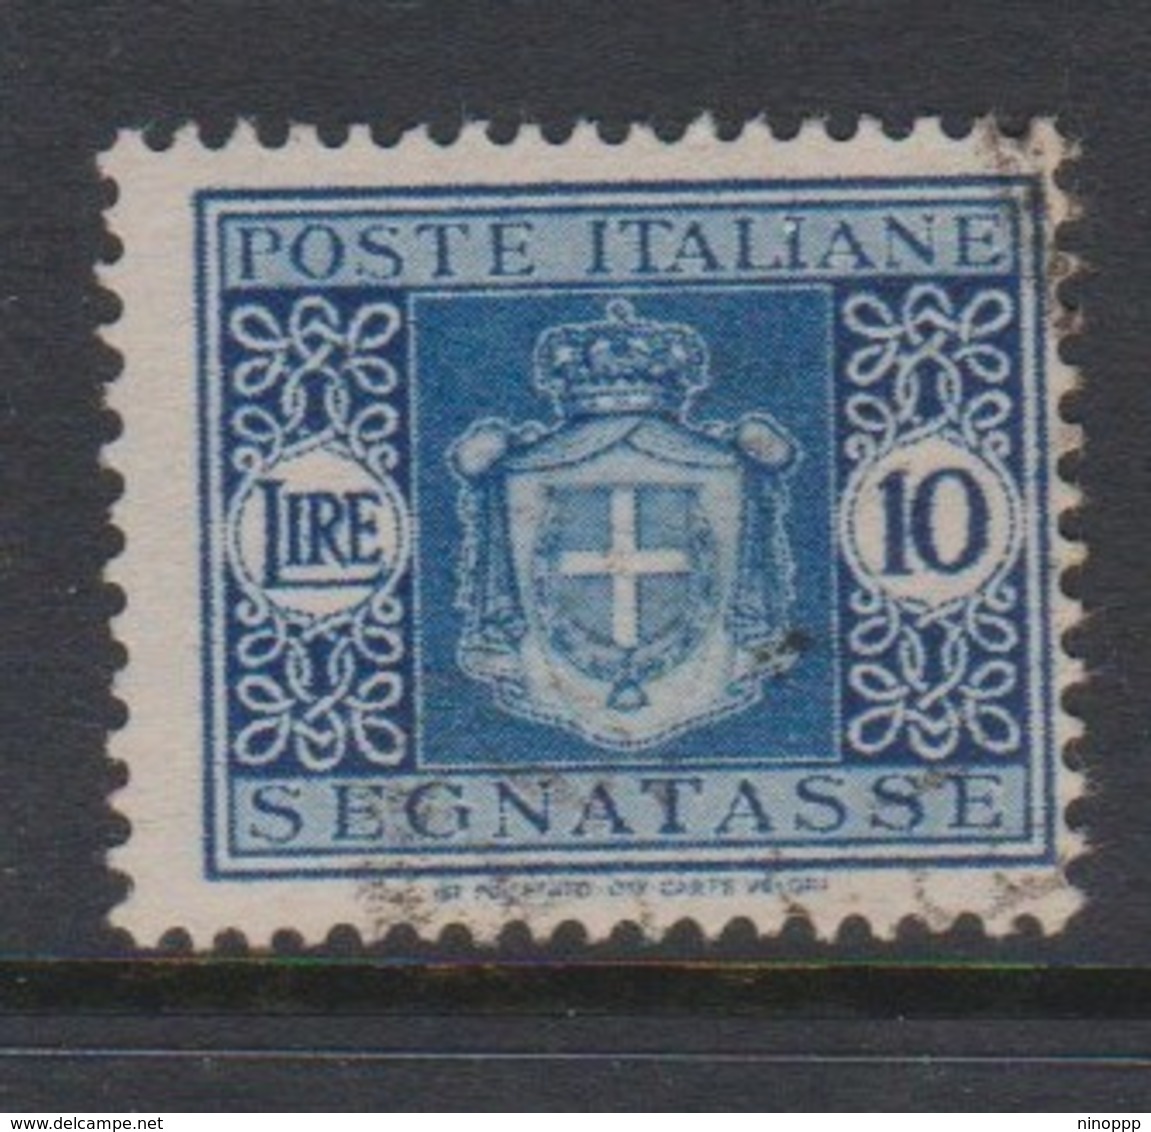 Italy PD 95 1945 Lieutenance  Postage Due,lire 10 Blue,used - Postage Due